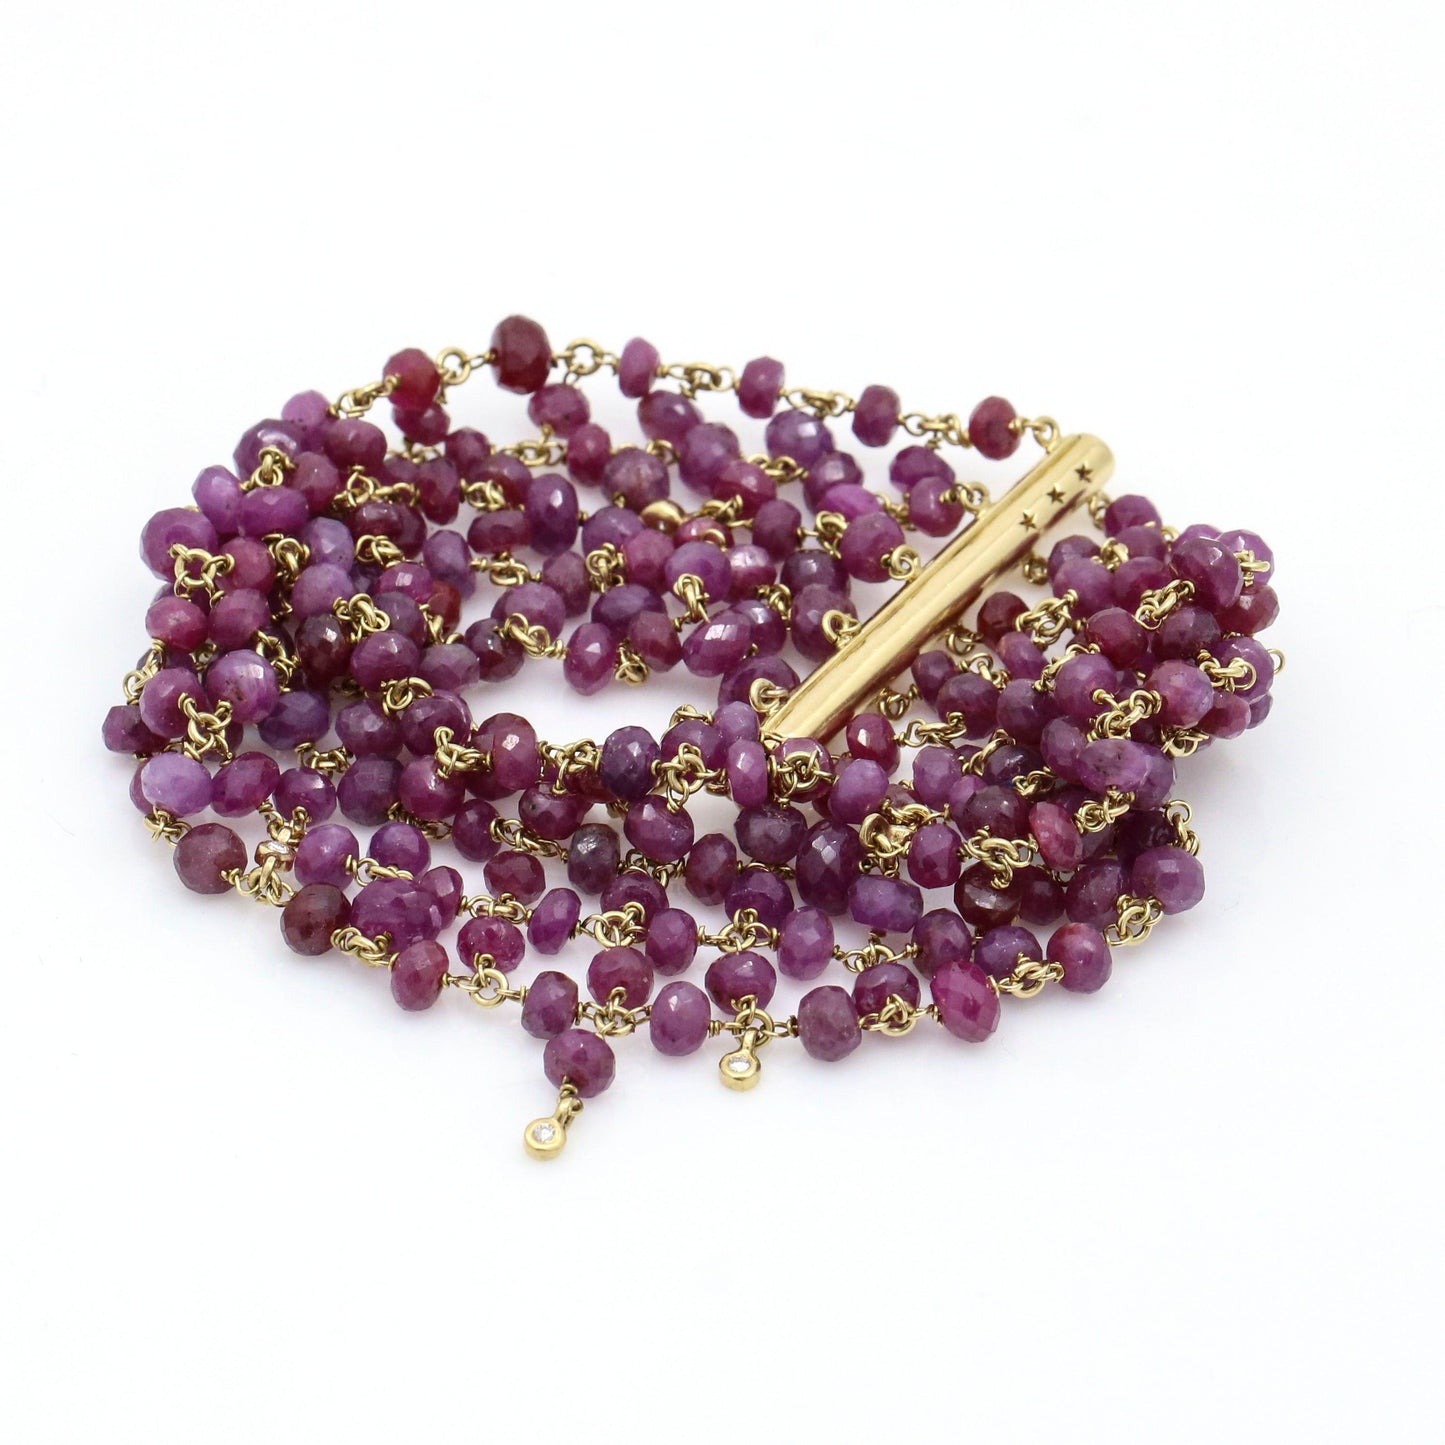 H. Stern Ruby Beads and Diamond Mesh Bracelet in 18k Yellow Gold - 31 Jewels Inc.